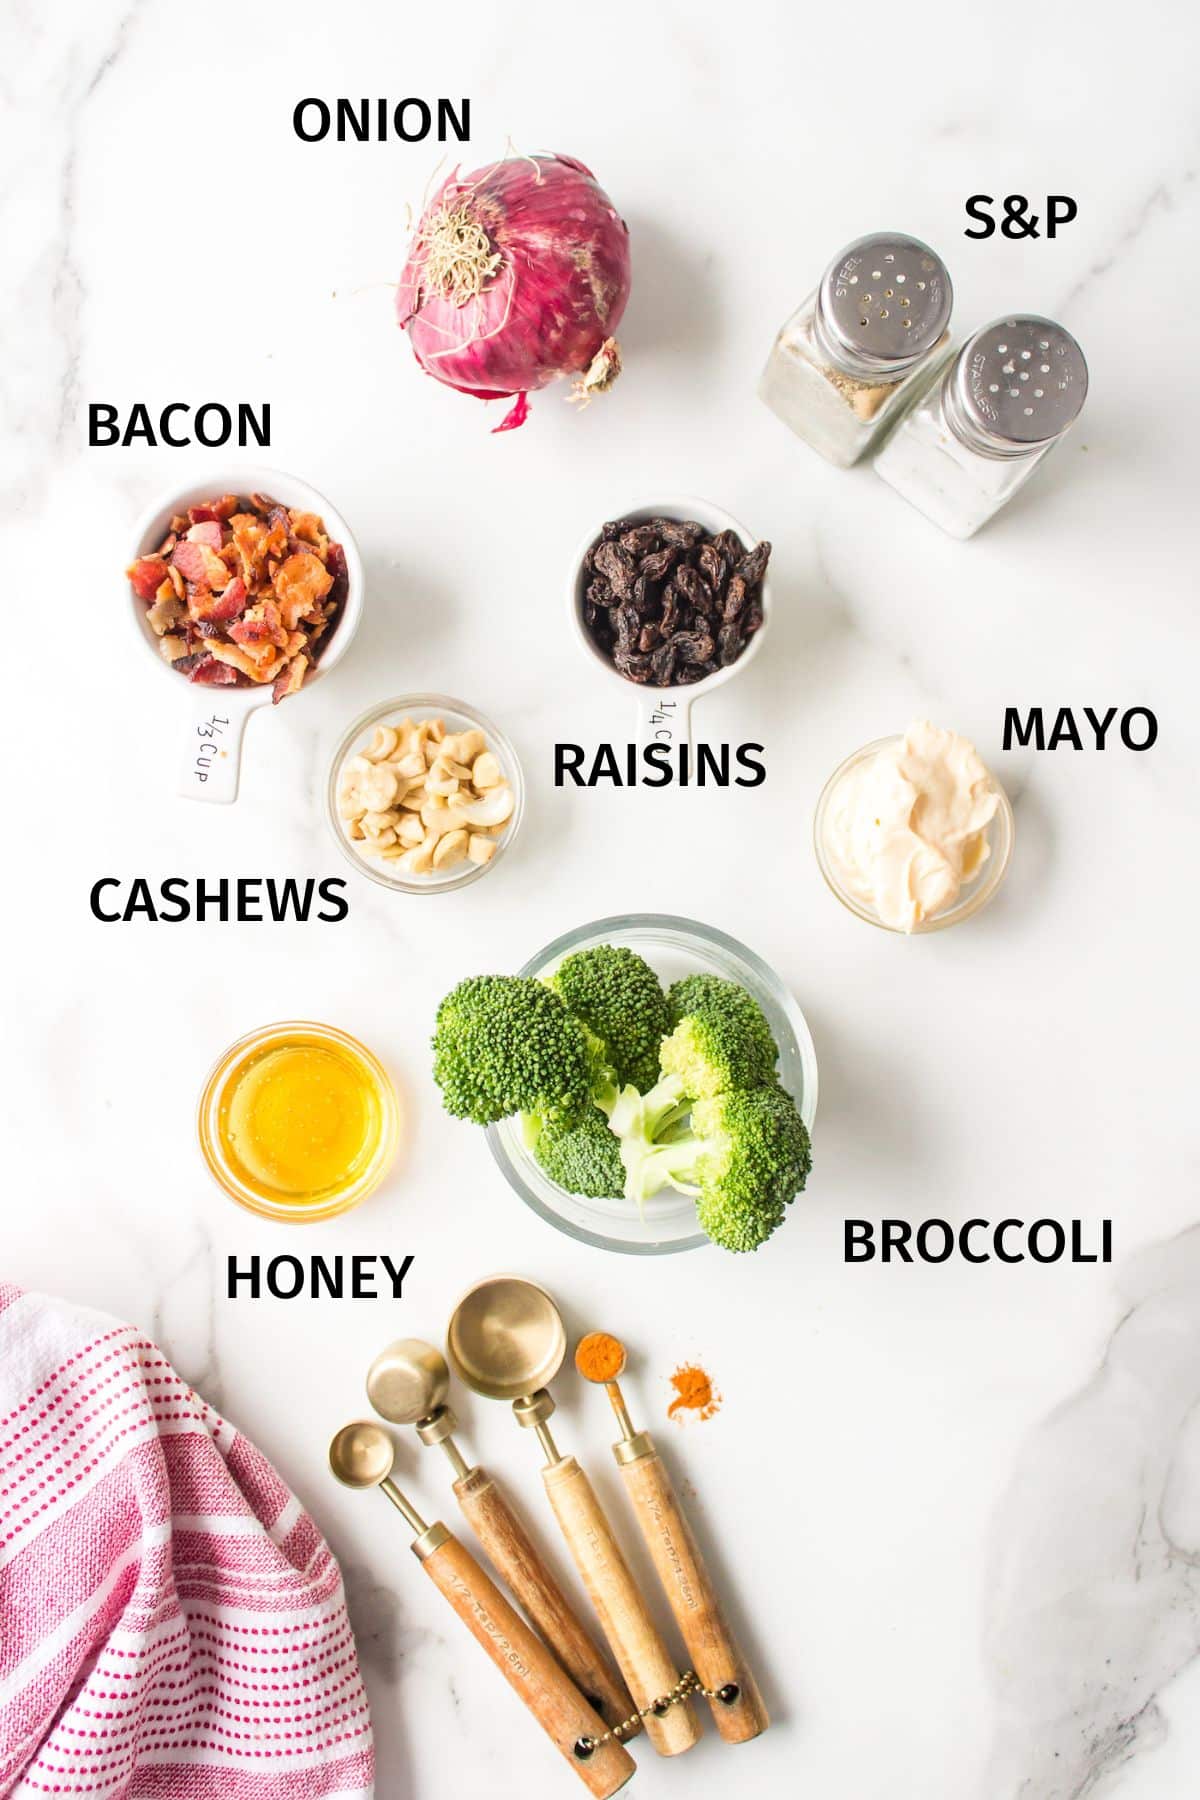 Ingredients to make Whole Foods Broccoli Salad in small bowls on a white surface.